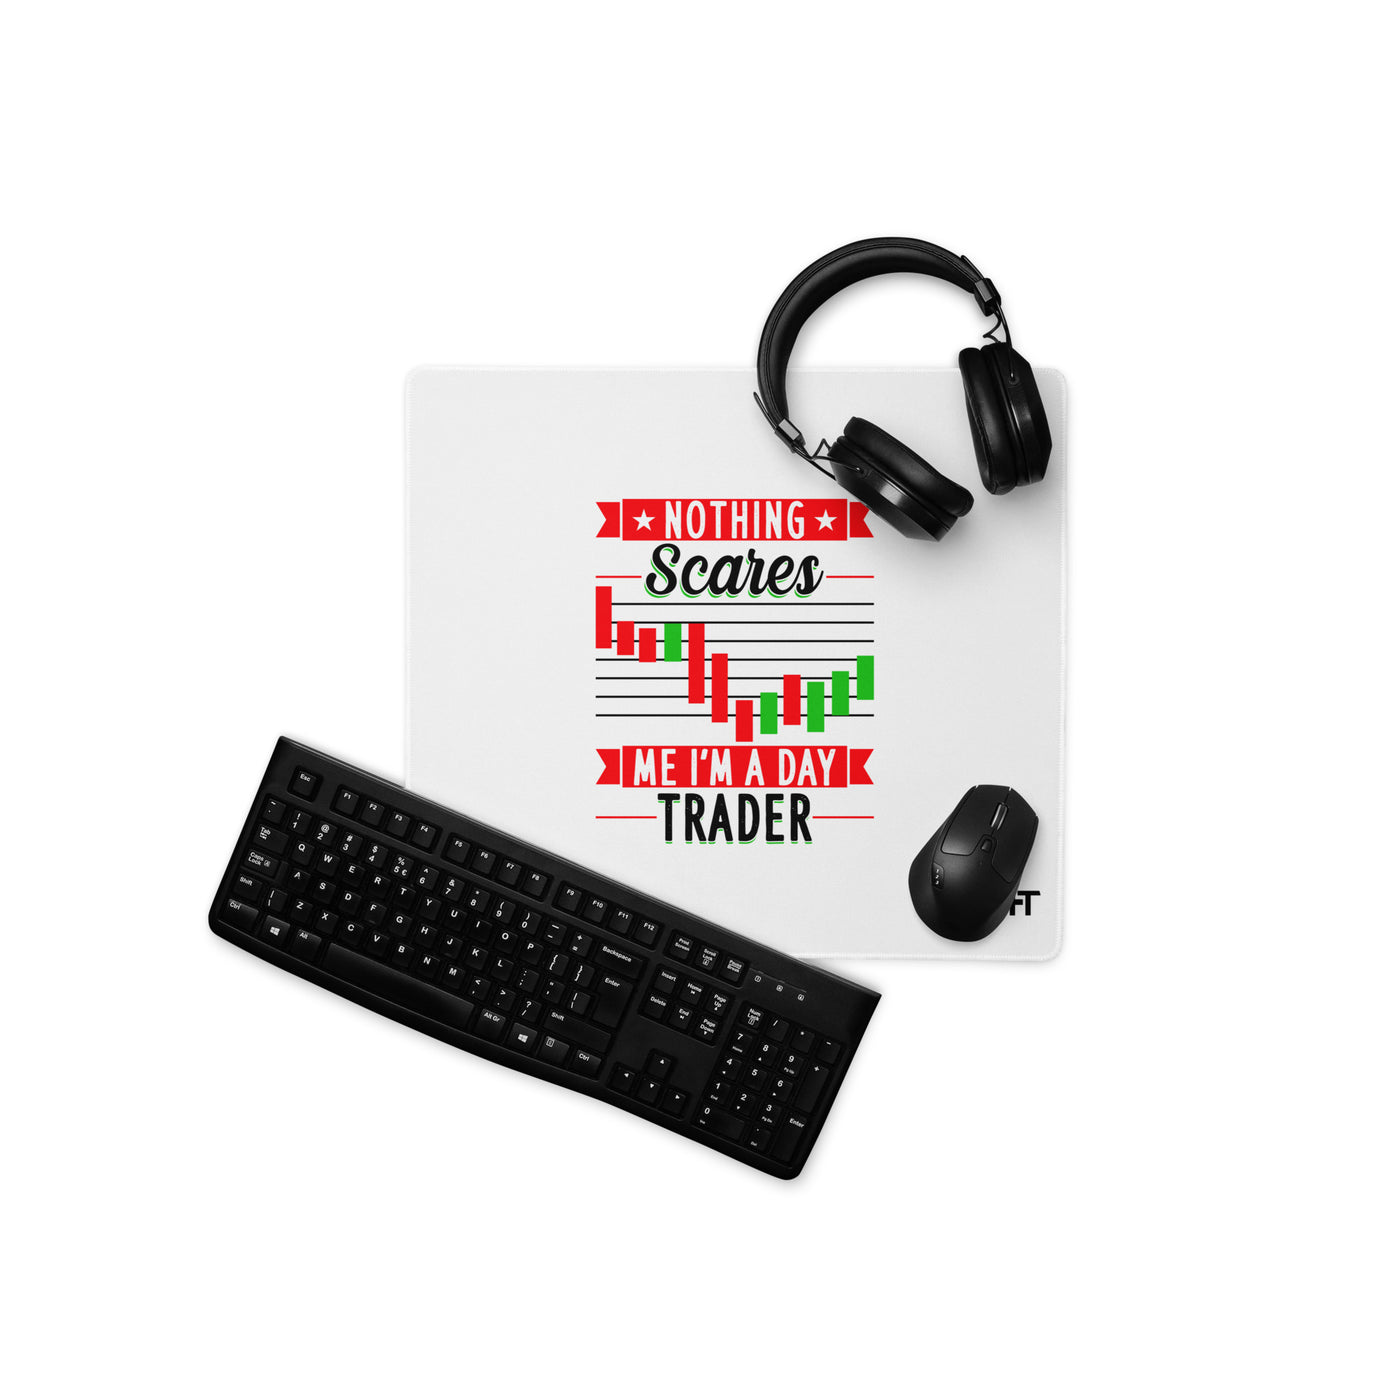 Nothing Scares me; I Am a Day Trader in Dark Text - Desk Mat